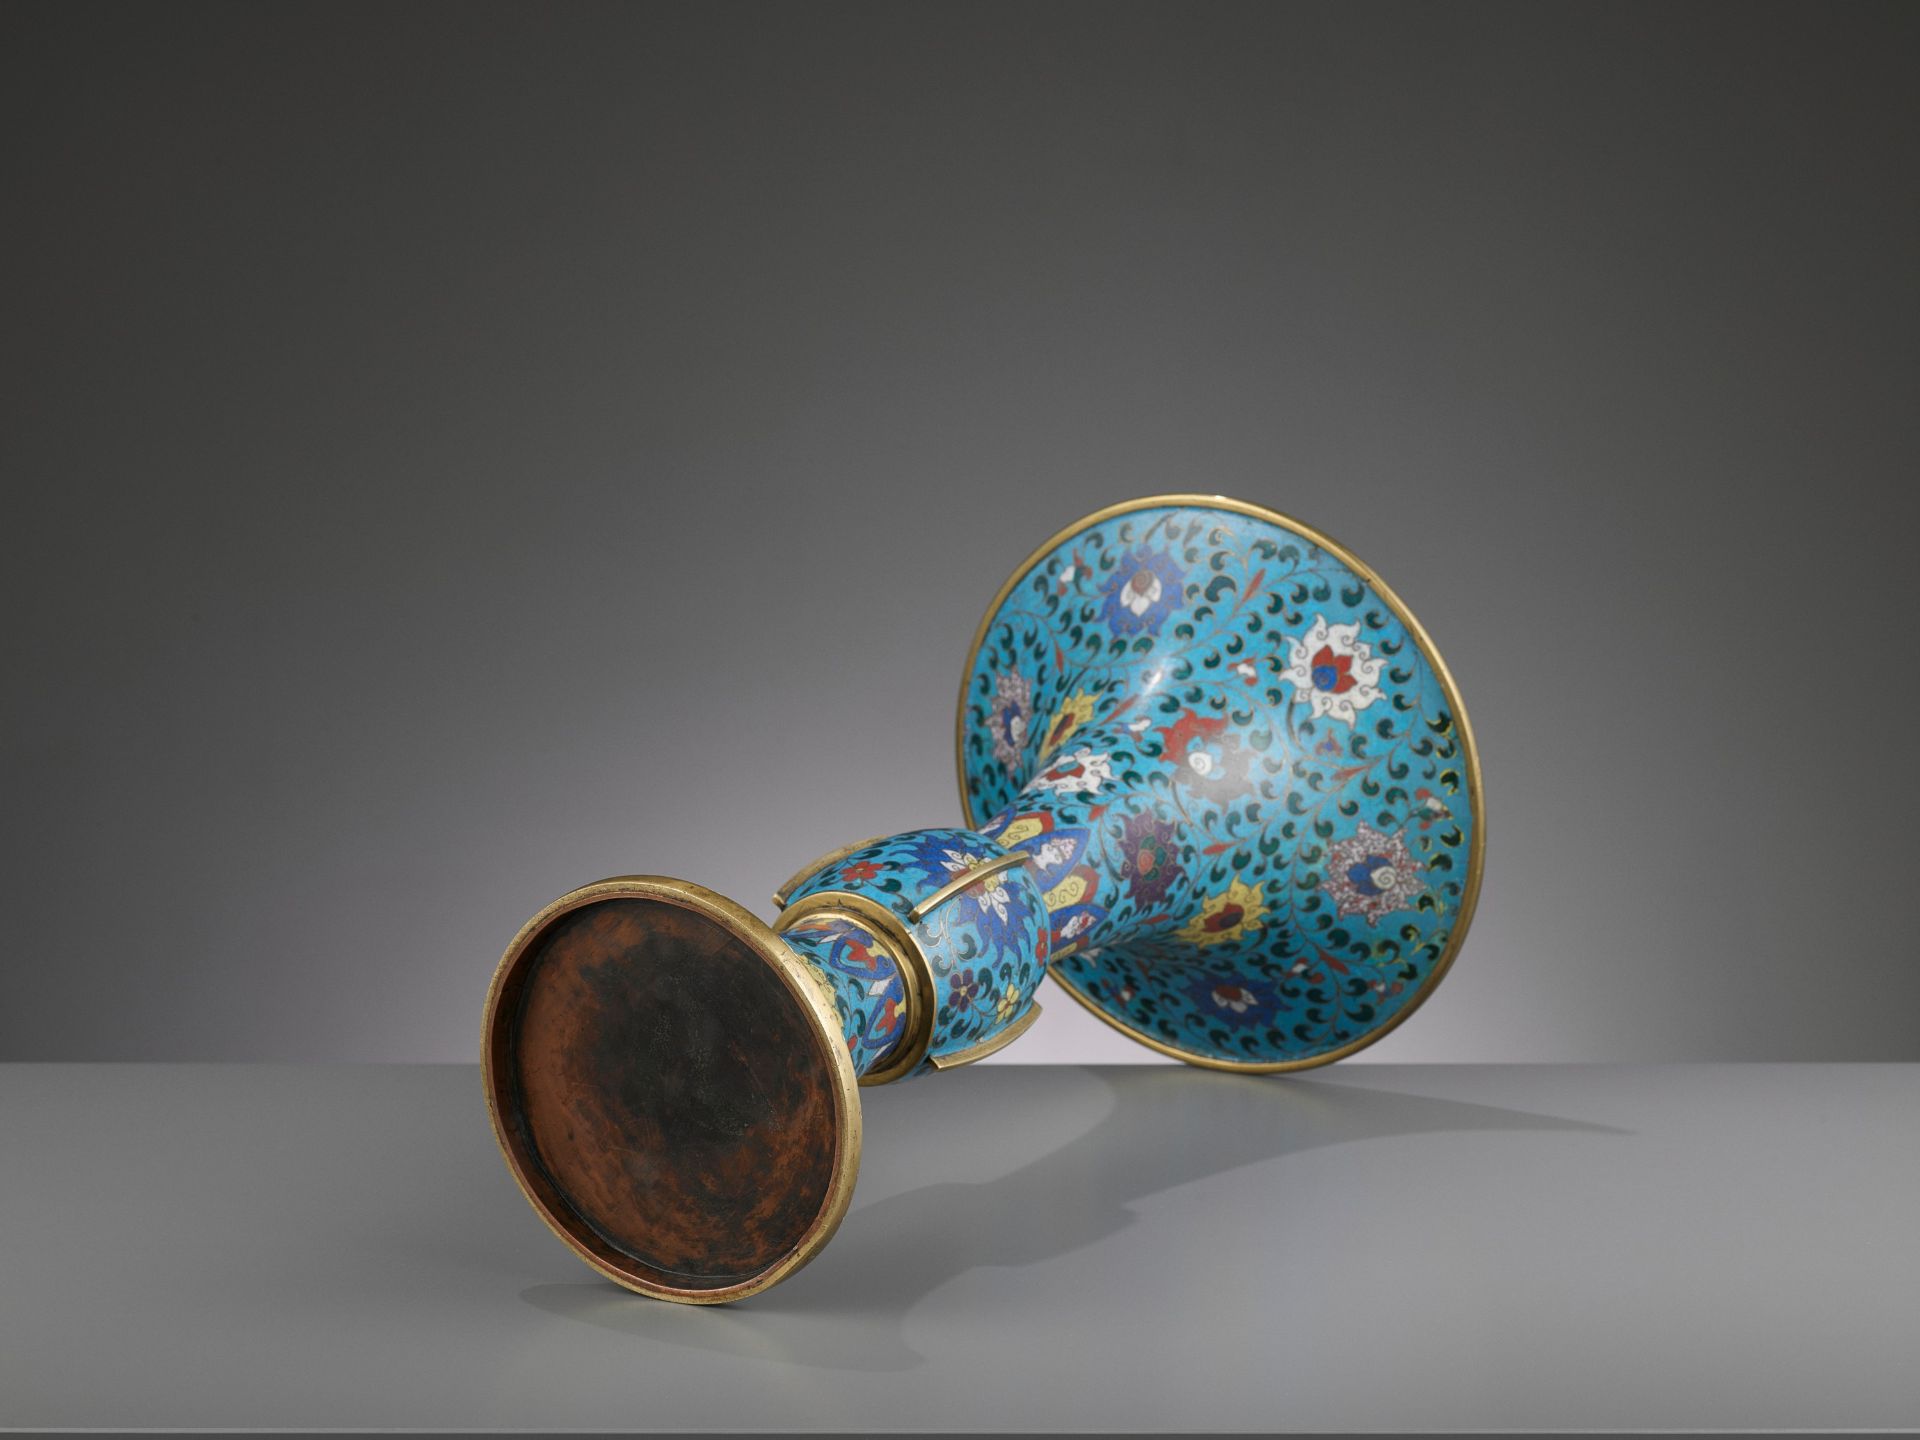 A LARGE CLOISONNE AND GILT-BRONZE GU, QING DYNASTY - Image 6 of 6